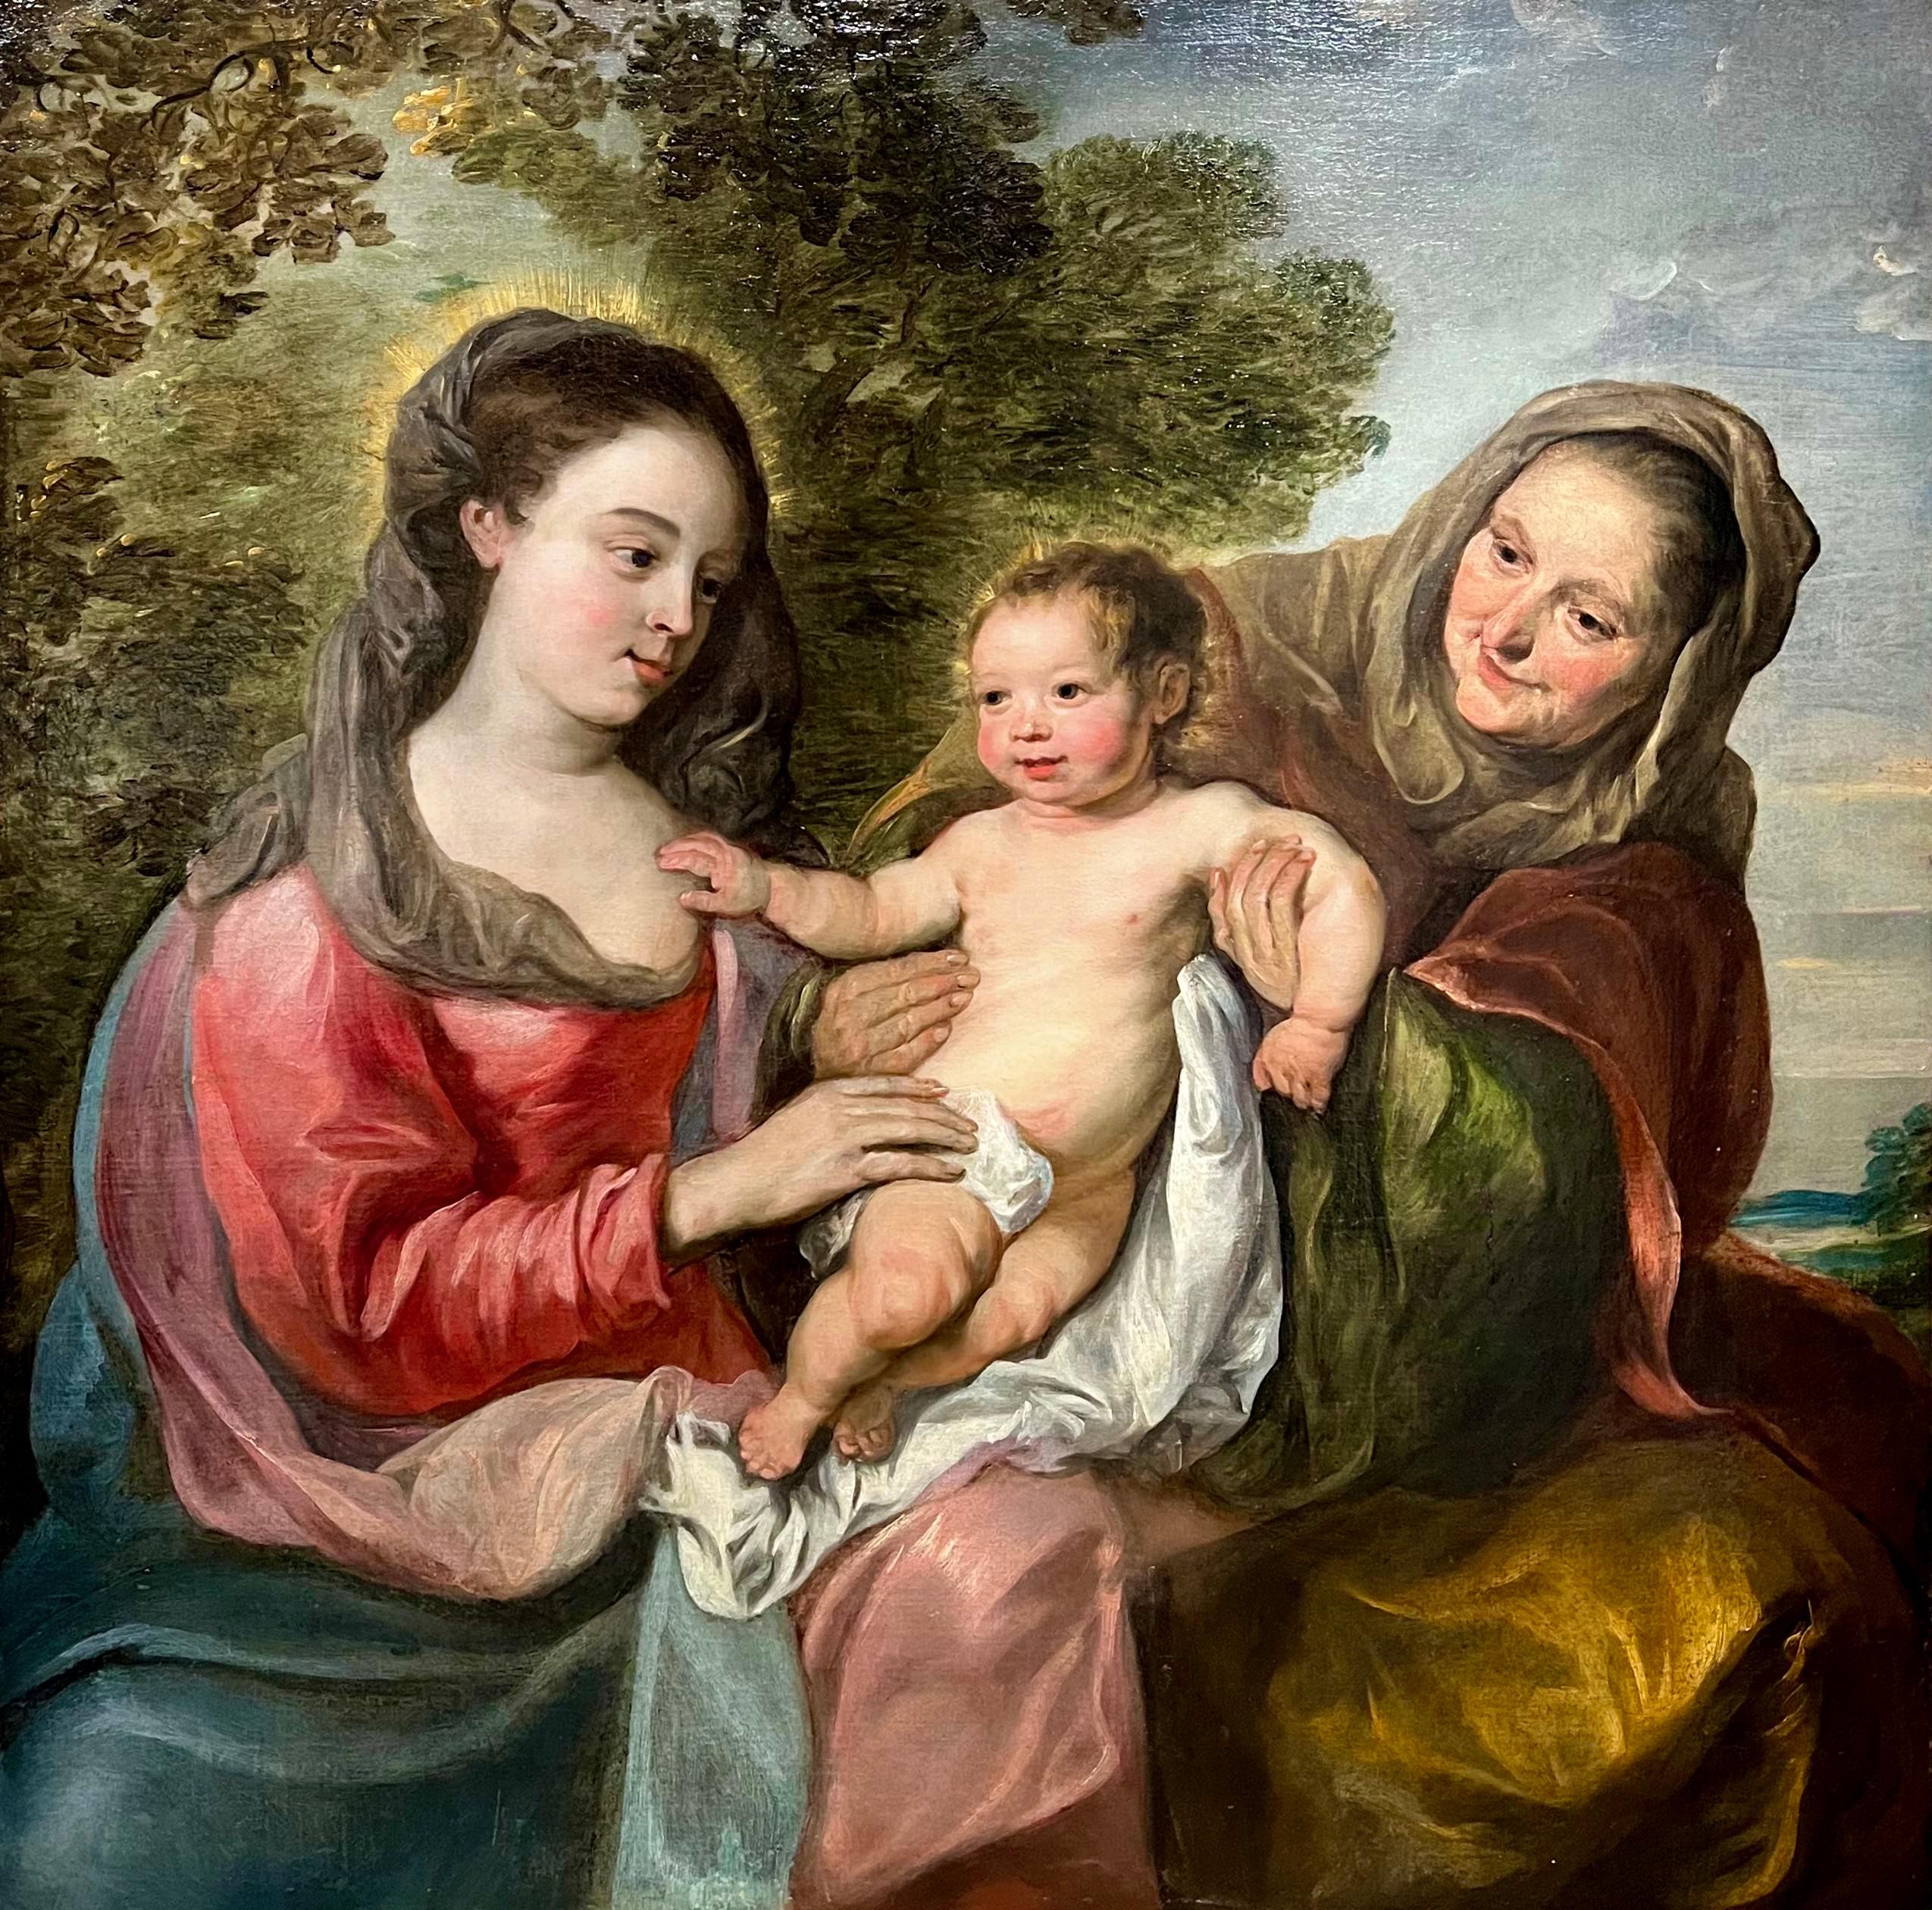 Nicolas de Liemaker Landscape Painting - Large 17th century religious family painting - Mary with Christ and Anna